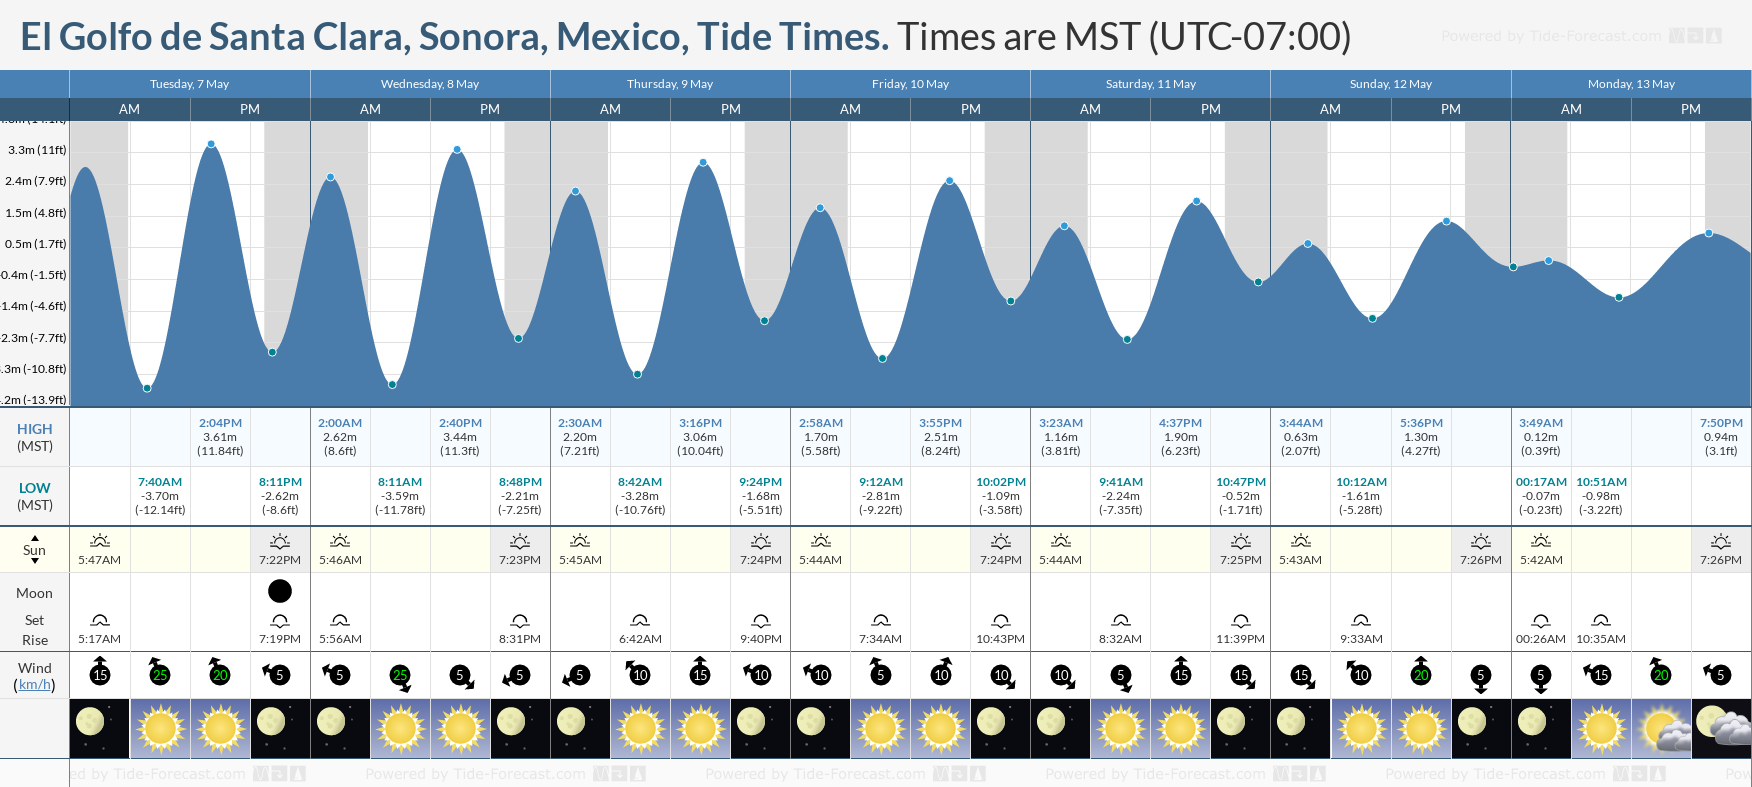 El Golfo de Santa Clara, Sonora, Mexico Tide Chart including high and low tide tide times for the next 7 days